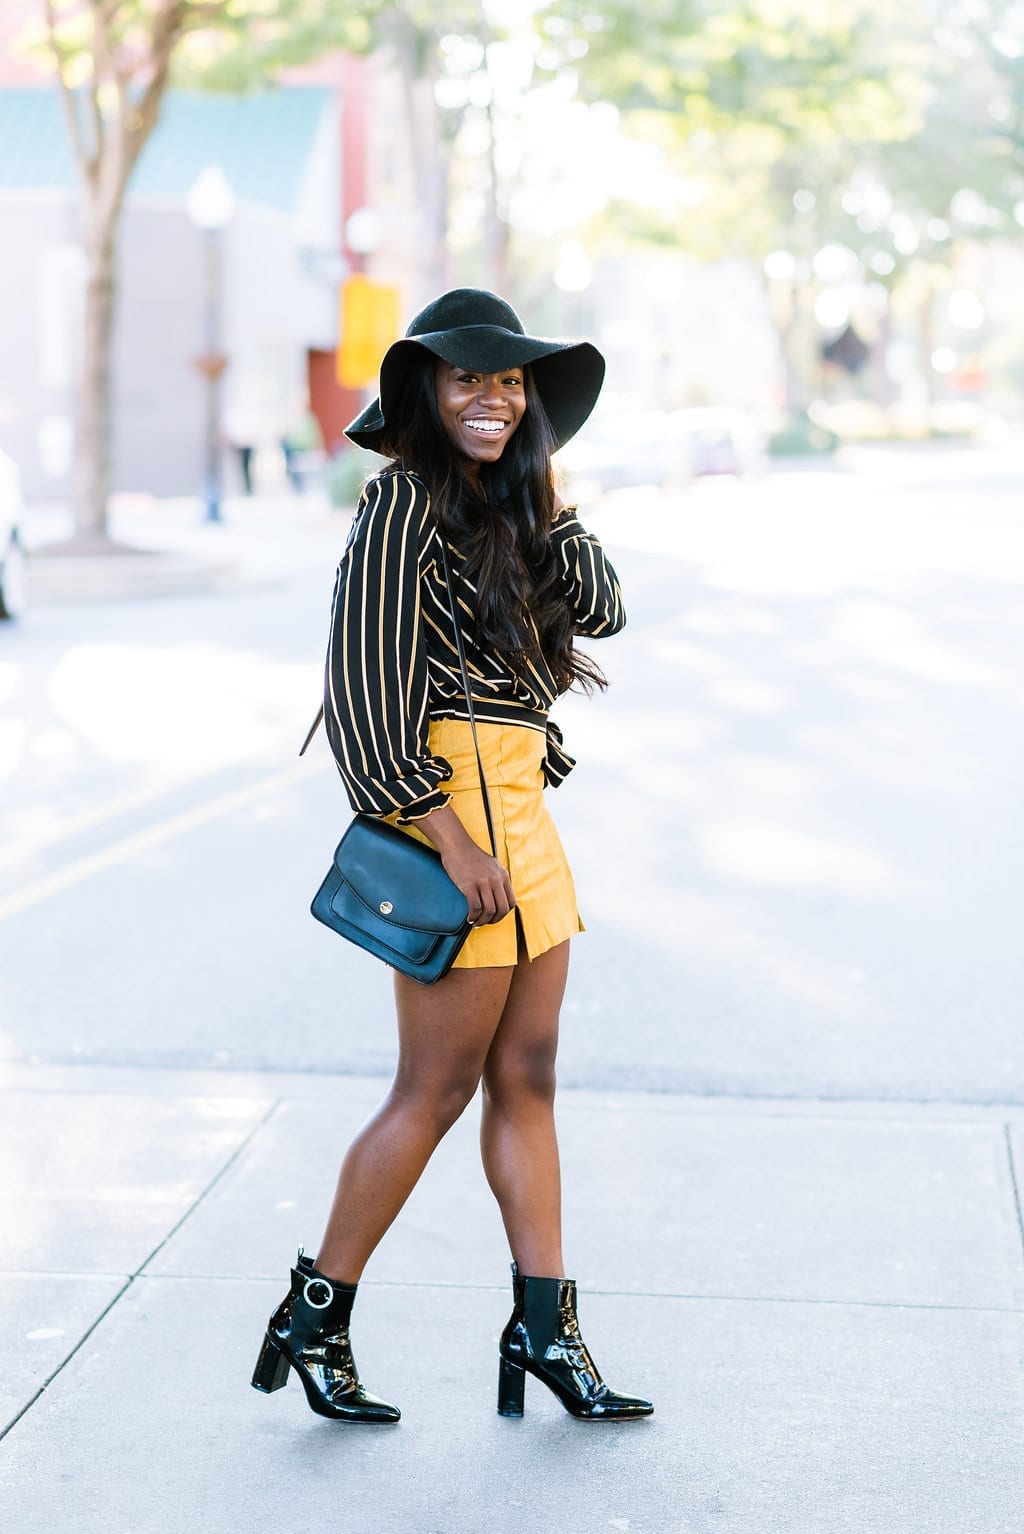 Moving to a new city in your 20's can be challenging. Whether it's a big or small city, starting over can be tough. Here are my tips for an easy move. | GoodTomiCha | Southern Fashion + Lifestyle Blogger 